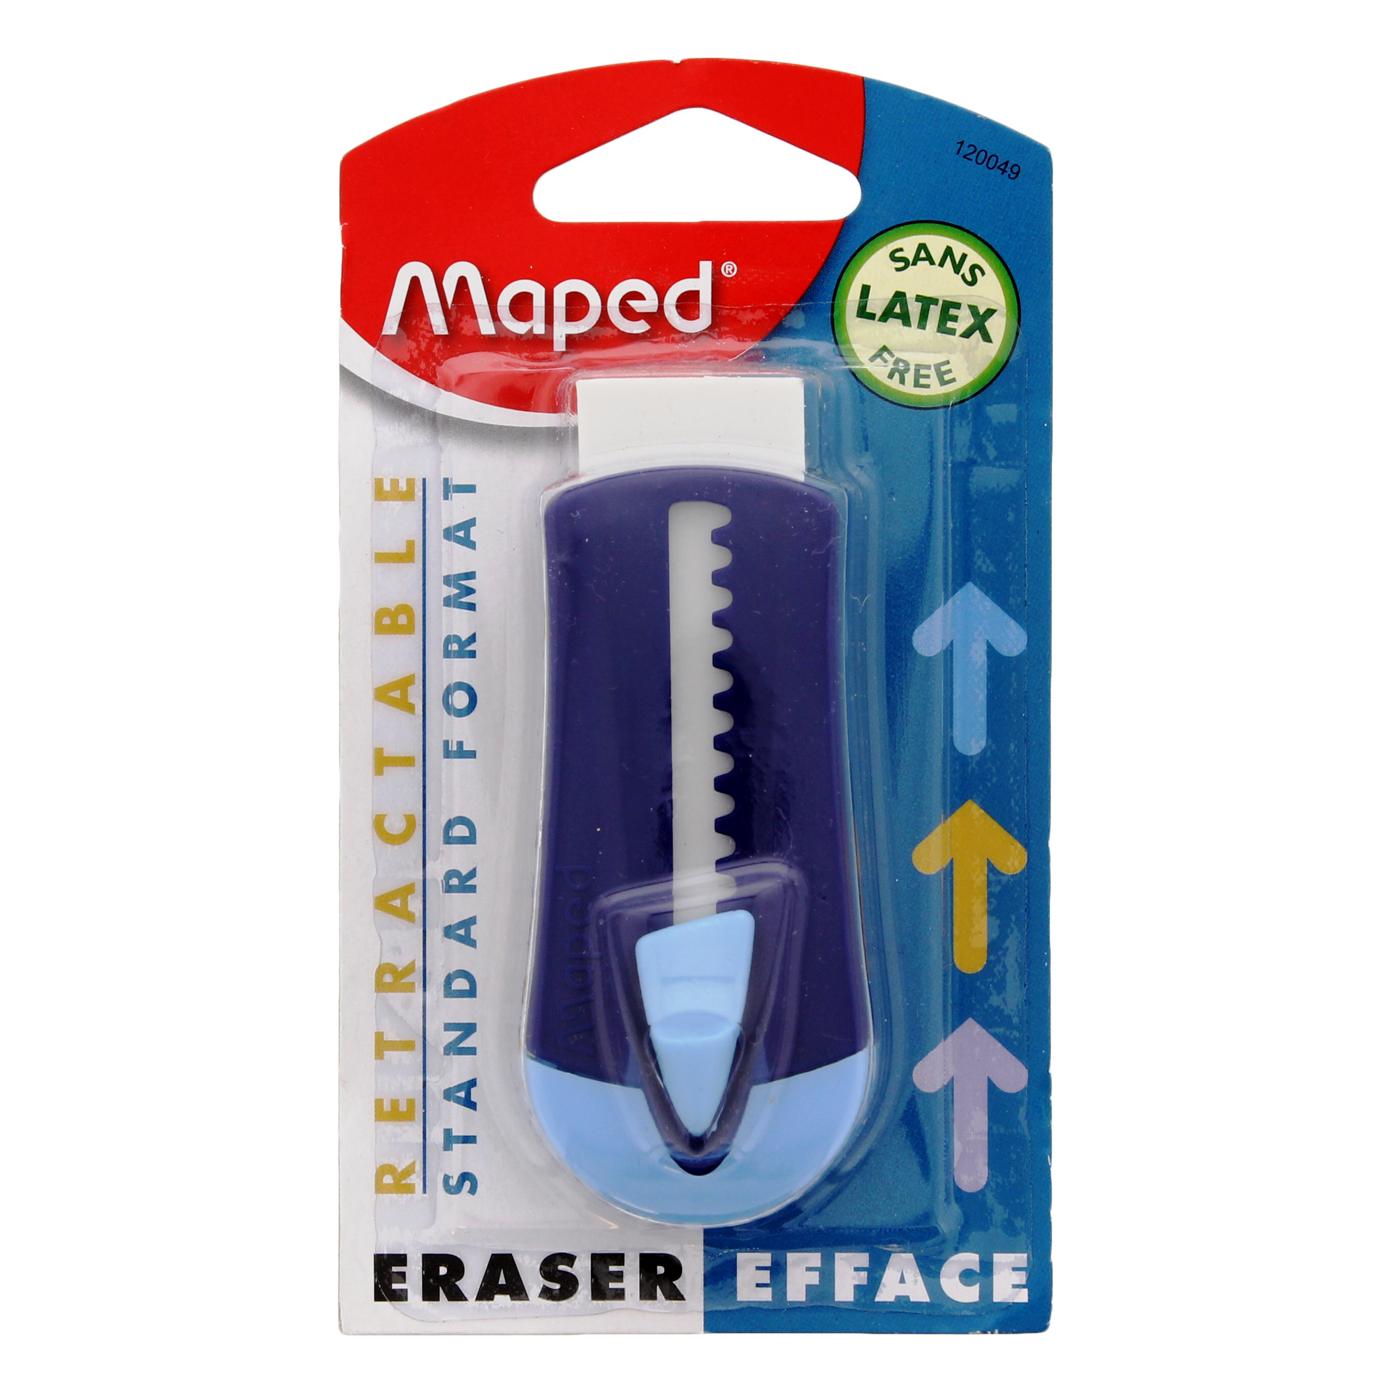 Maped Universal Retractable Eraser; image 2 of 4